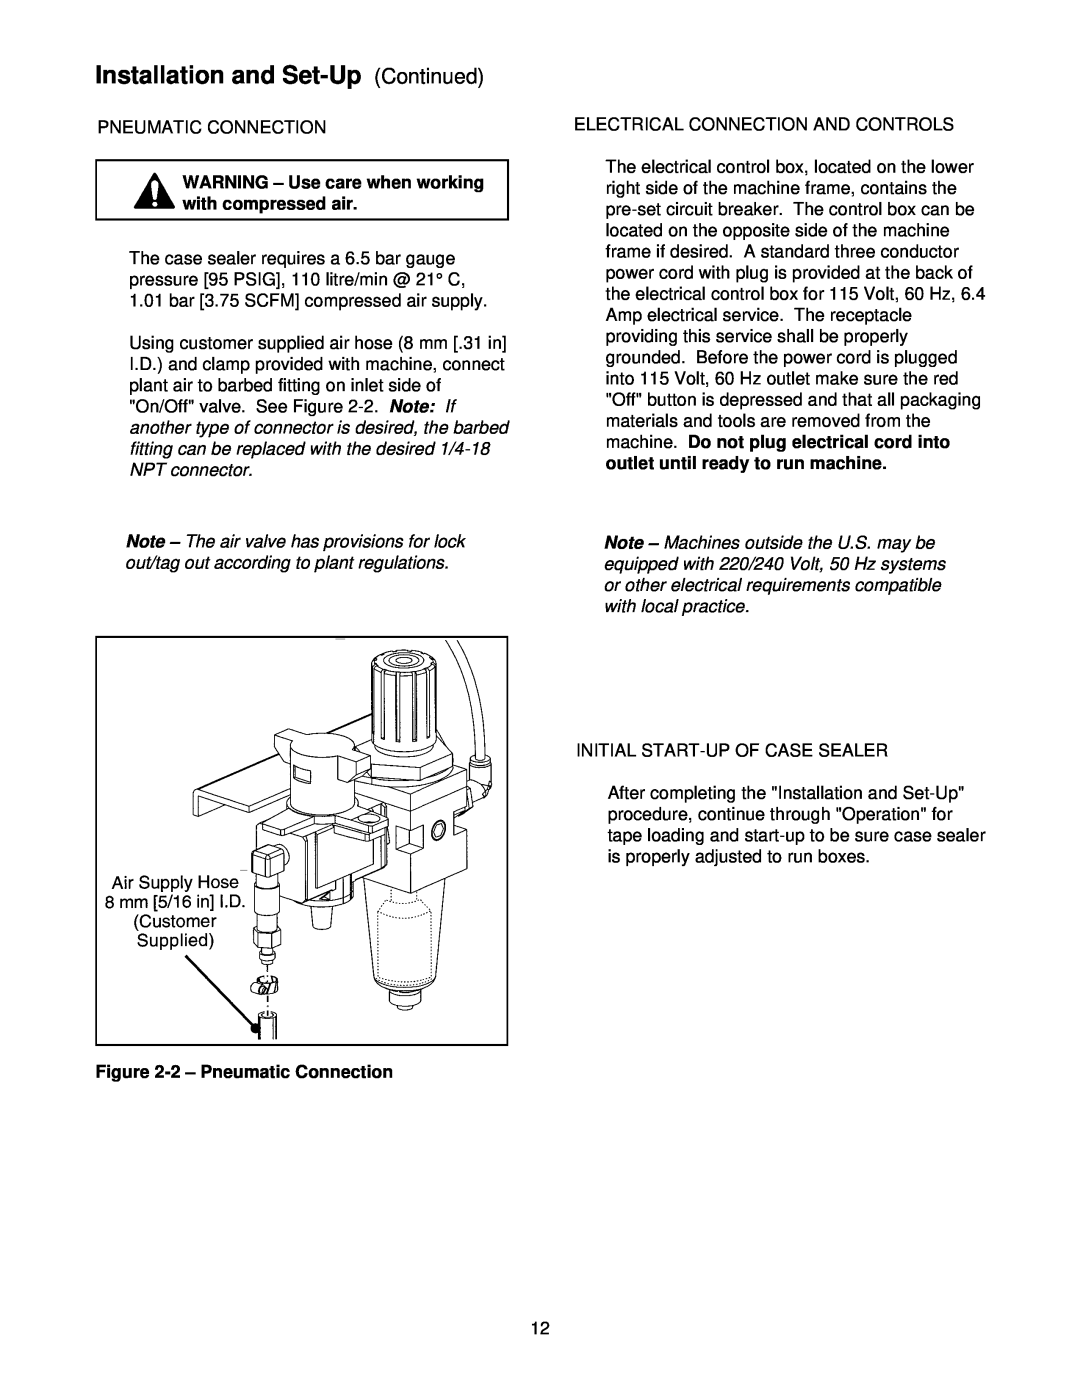 3M 800r3 manual WARNING - Use care when working with compressed air, 2 - Pneumatic Connection 